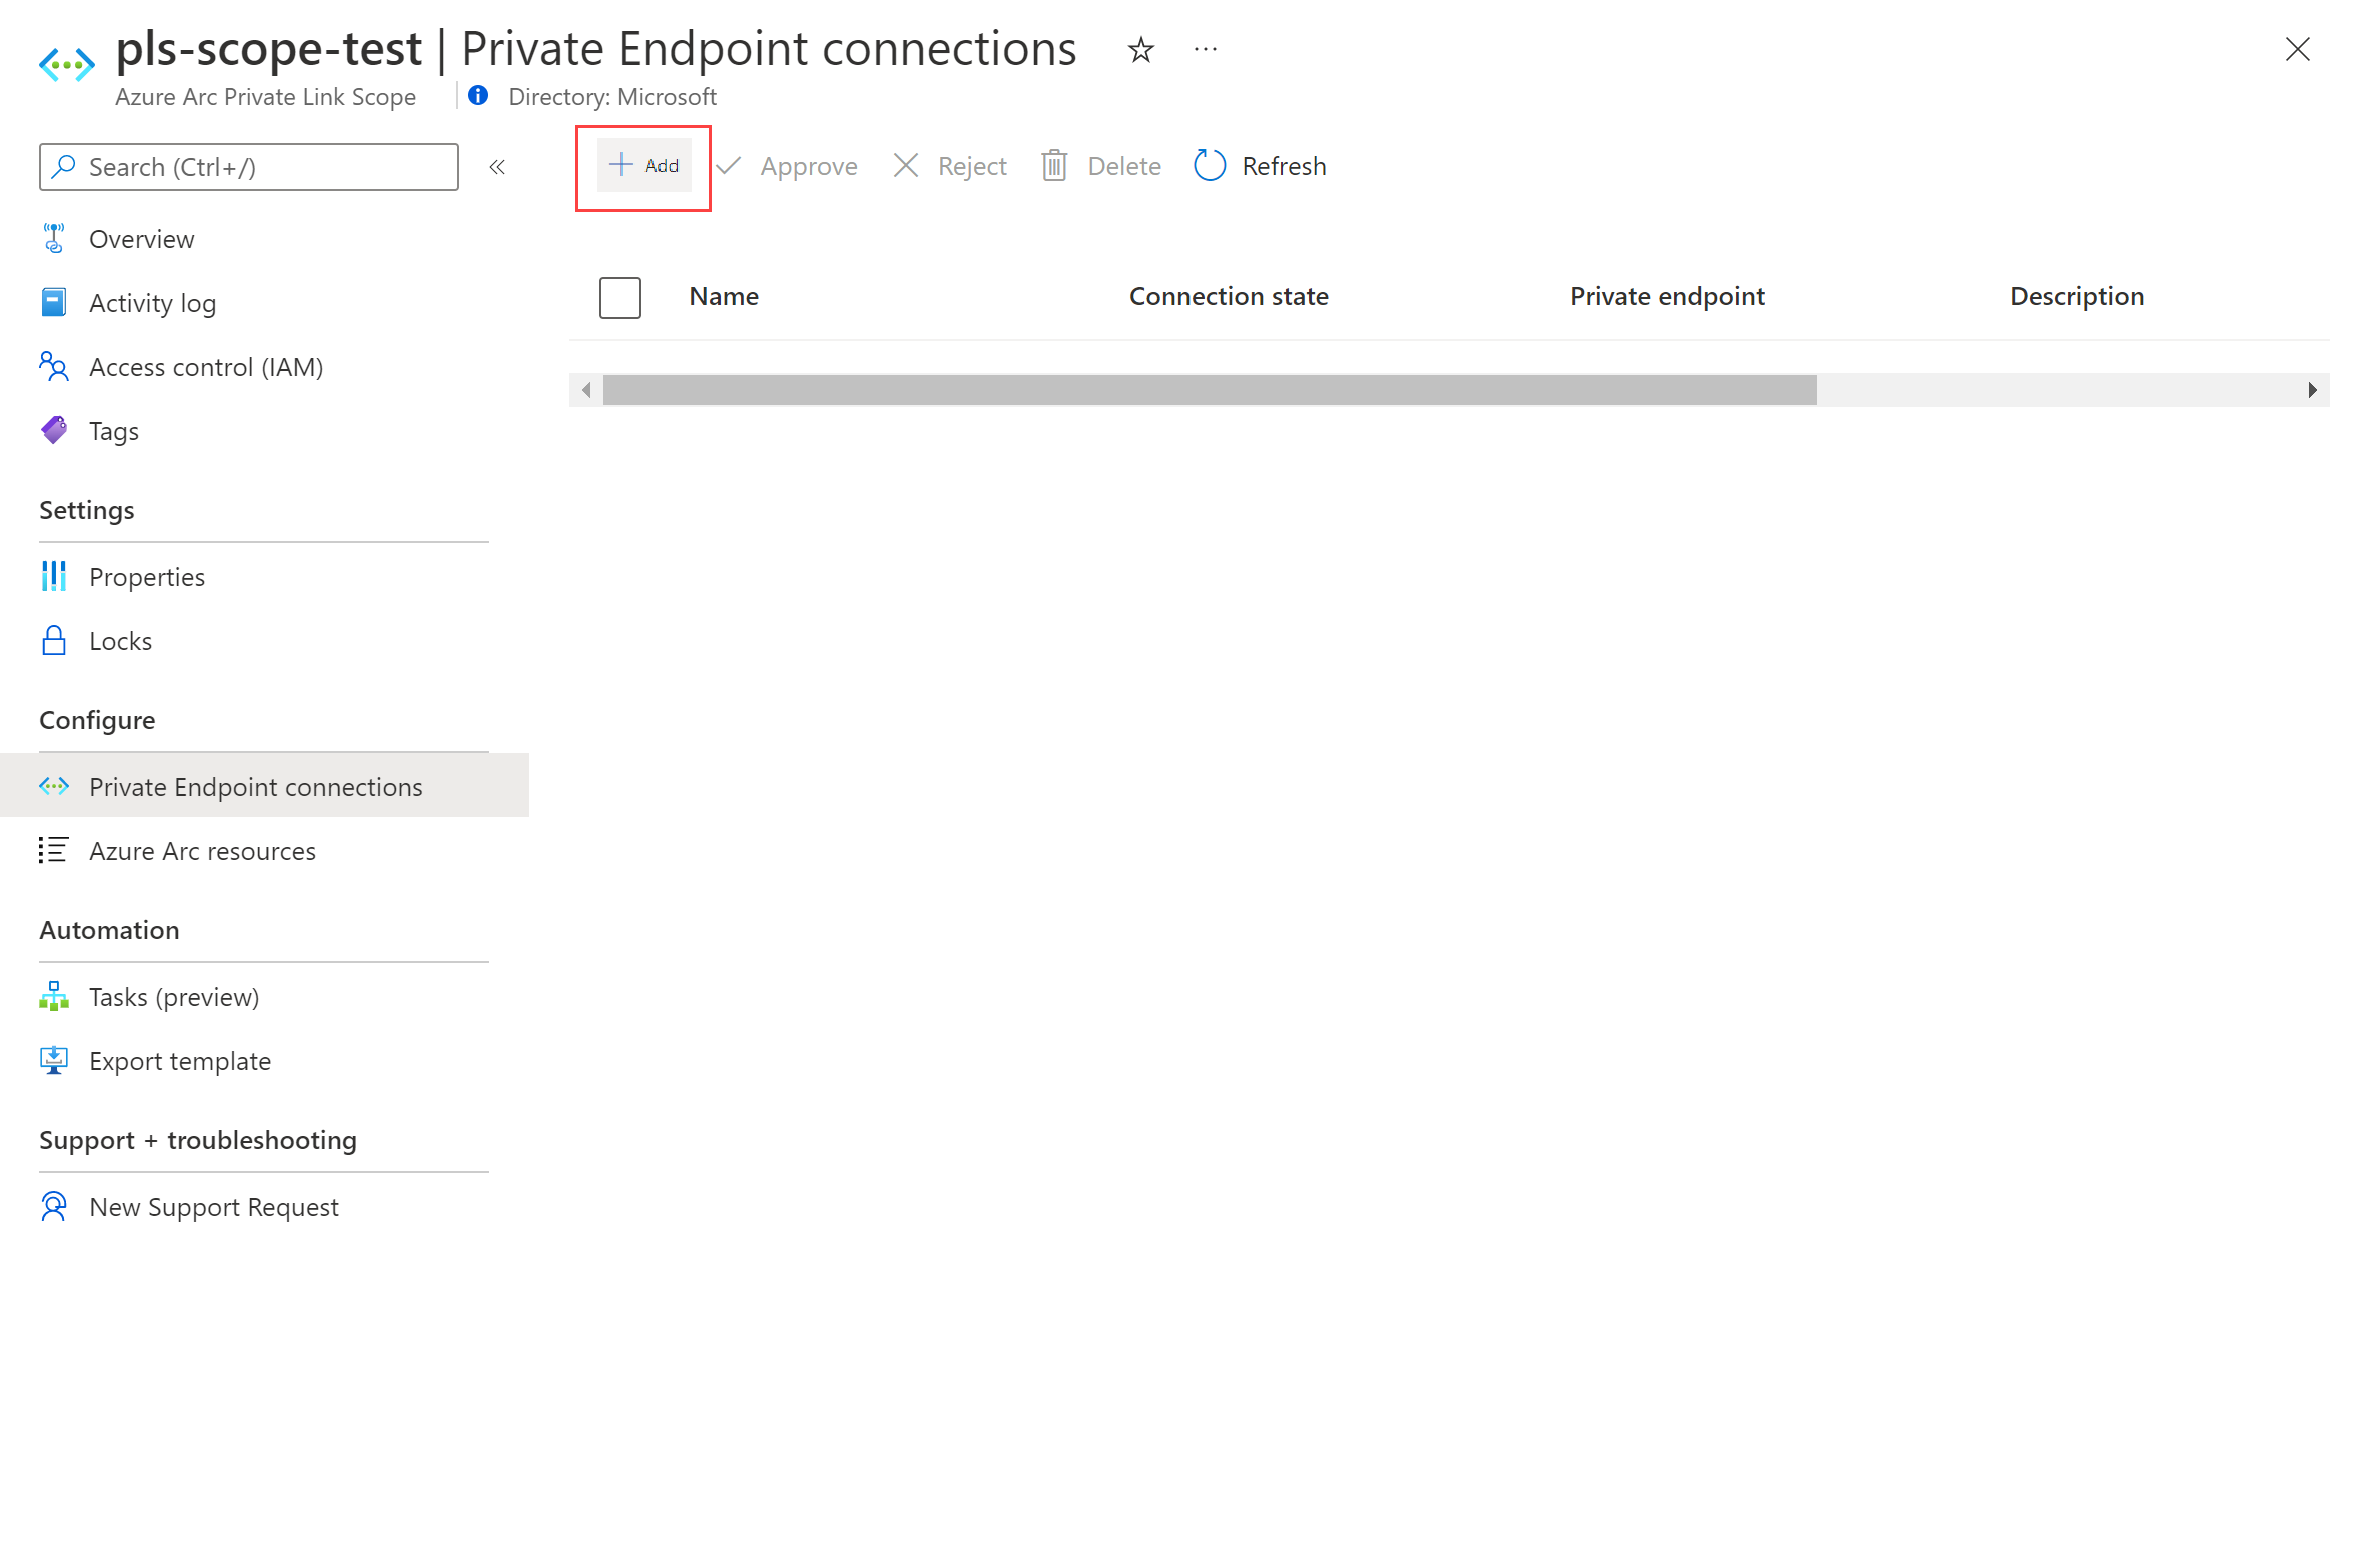 Screenshot of the Private Endpoint connections screen in the Azure portal.